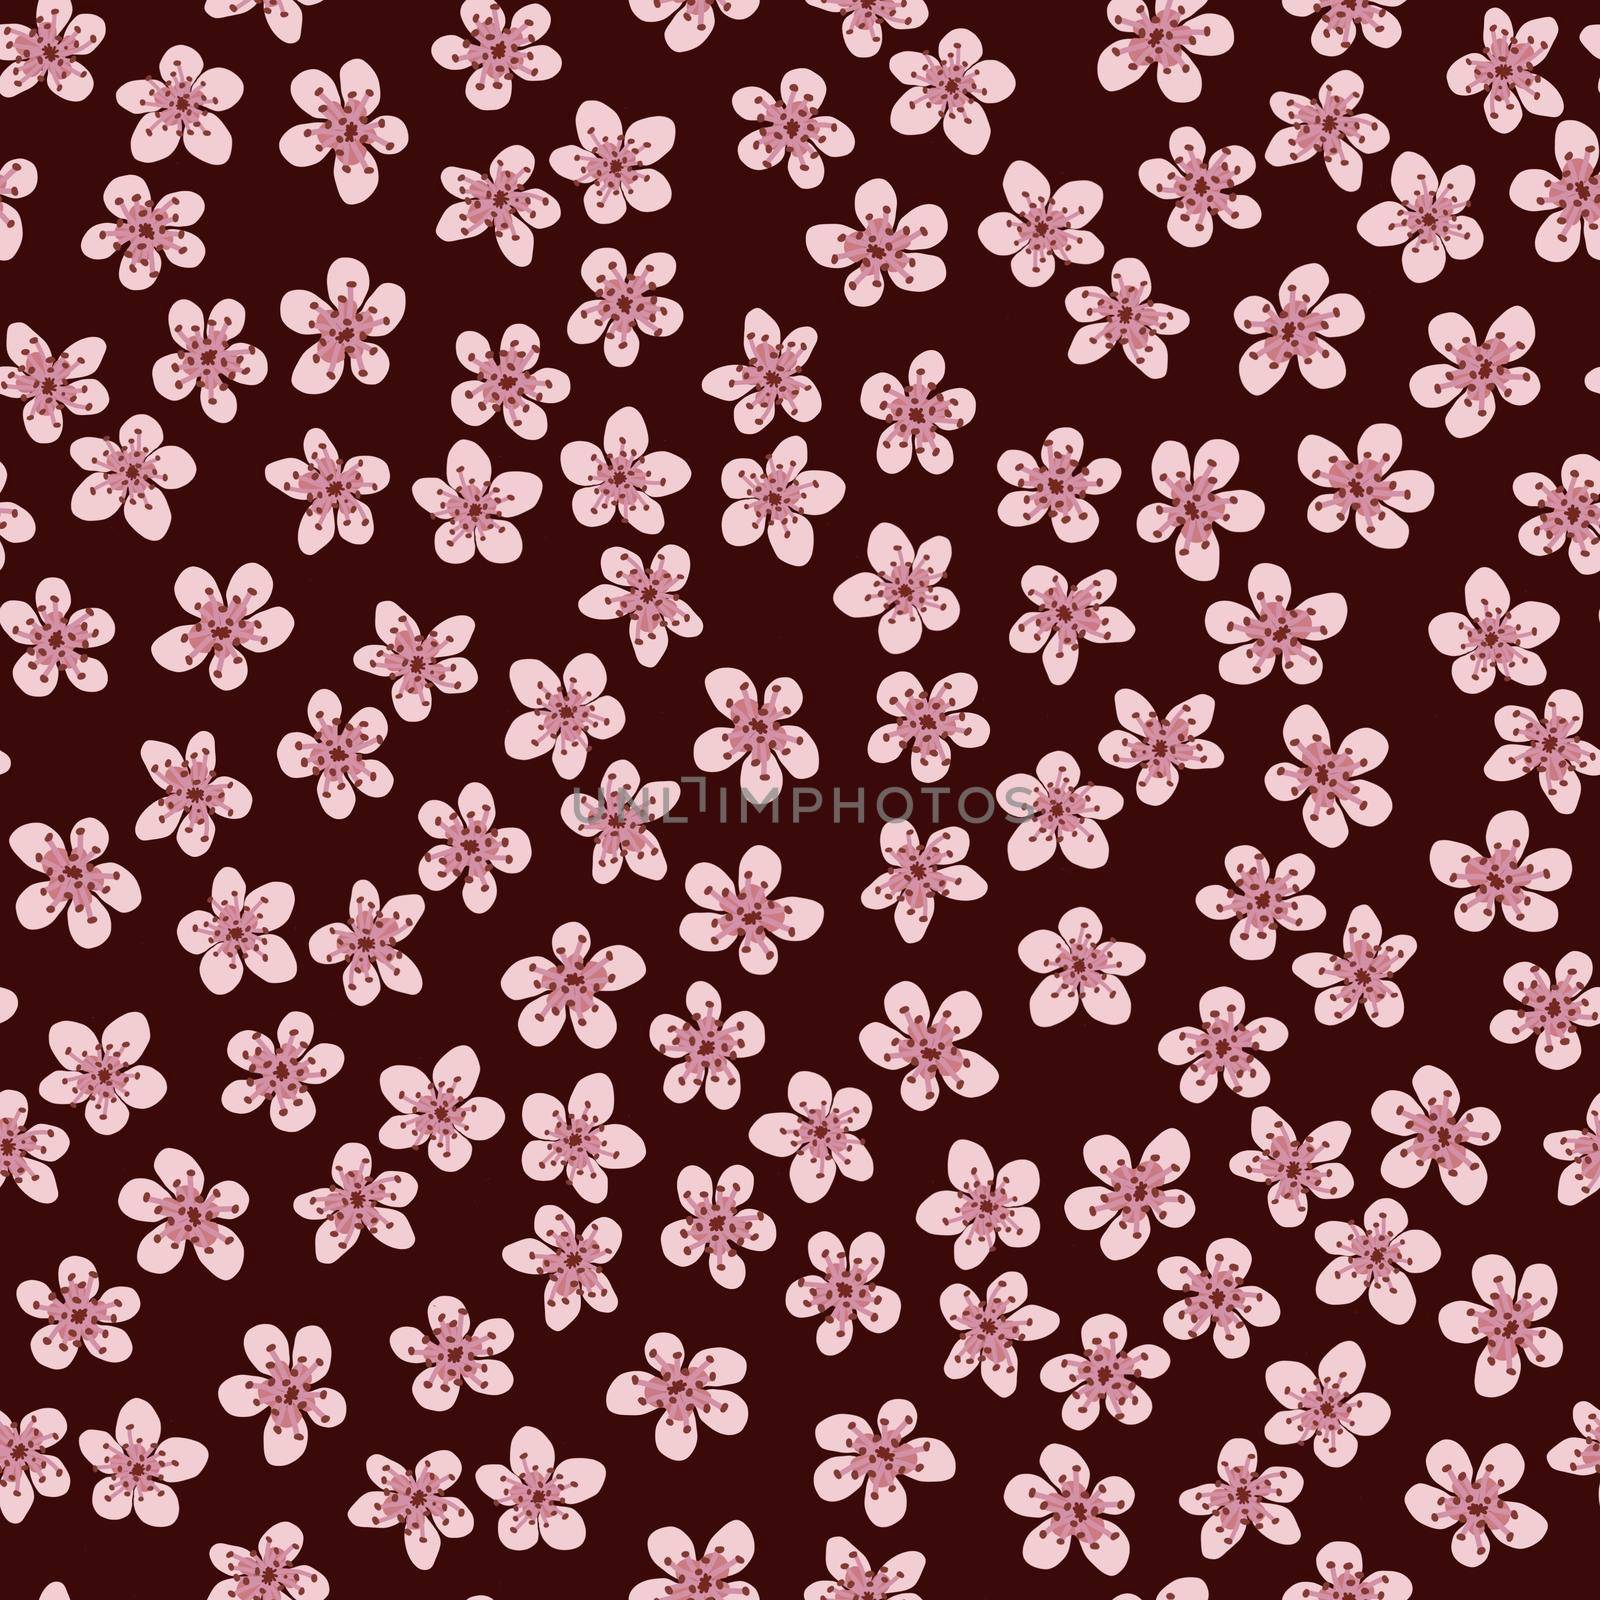 Seamless pattern with blossoming Japanese cherry sakura for fabric, packaging, wallpaper, textile decor, design, invitations, print, gift wrap, manufacturing. Pink flowers on burgundy background